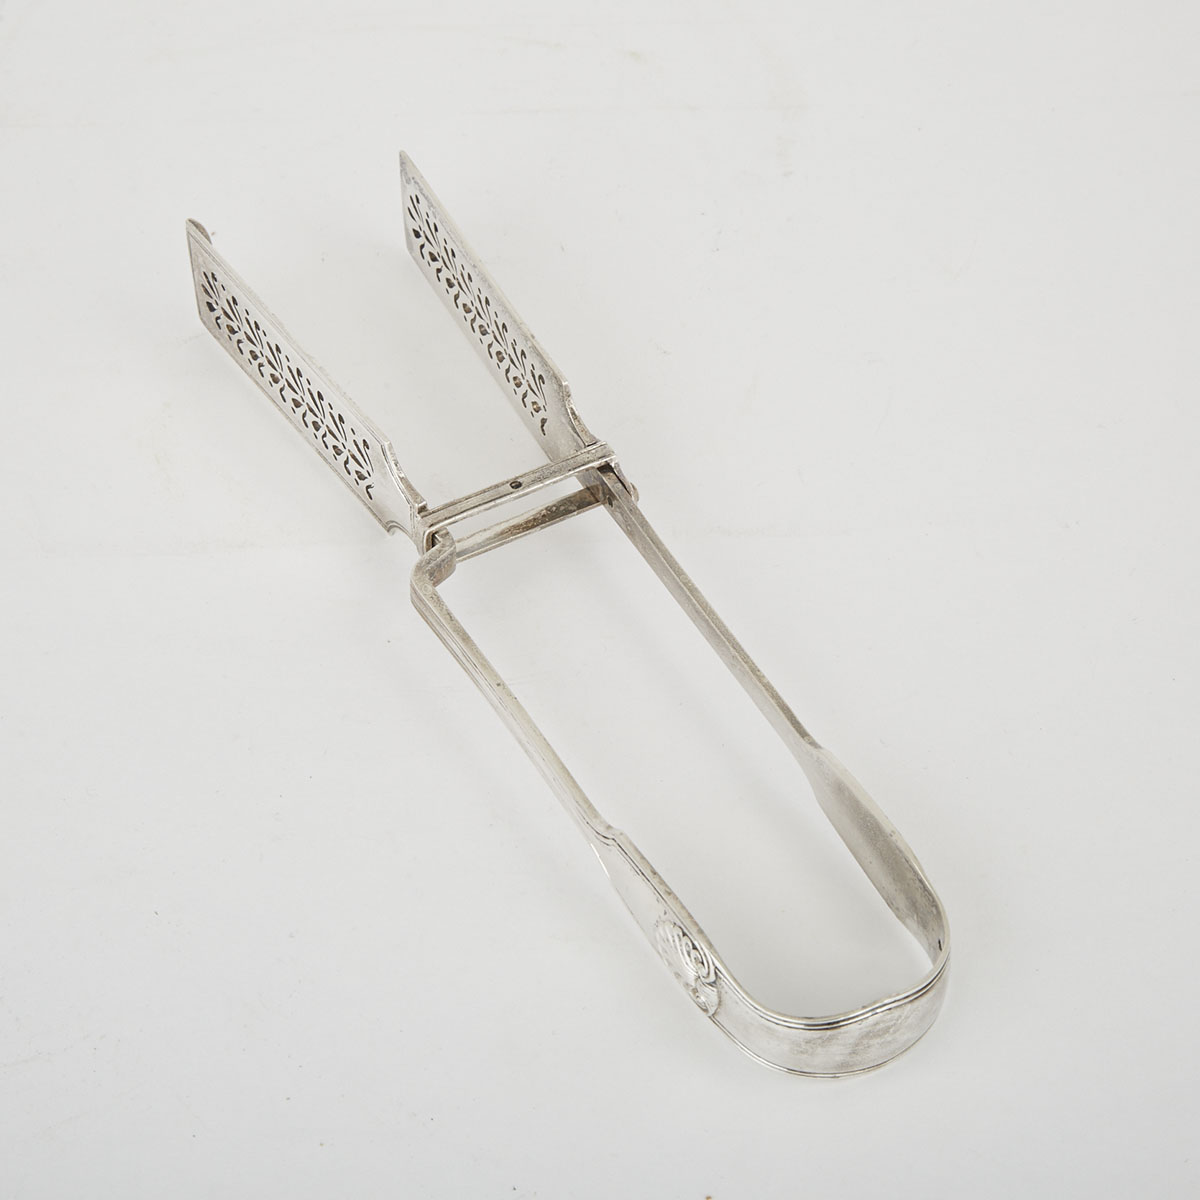 Victorian Silver Fiddle, Thread and Shell Pattern Asparagus Tongs, Mary Chawner, London, 1839